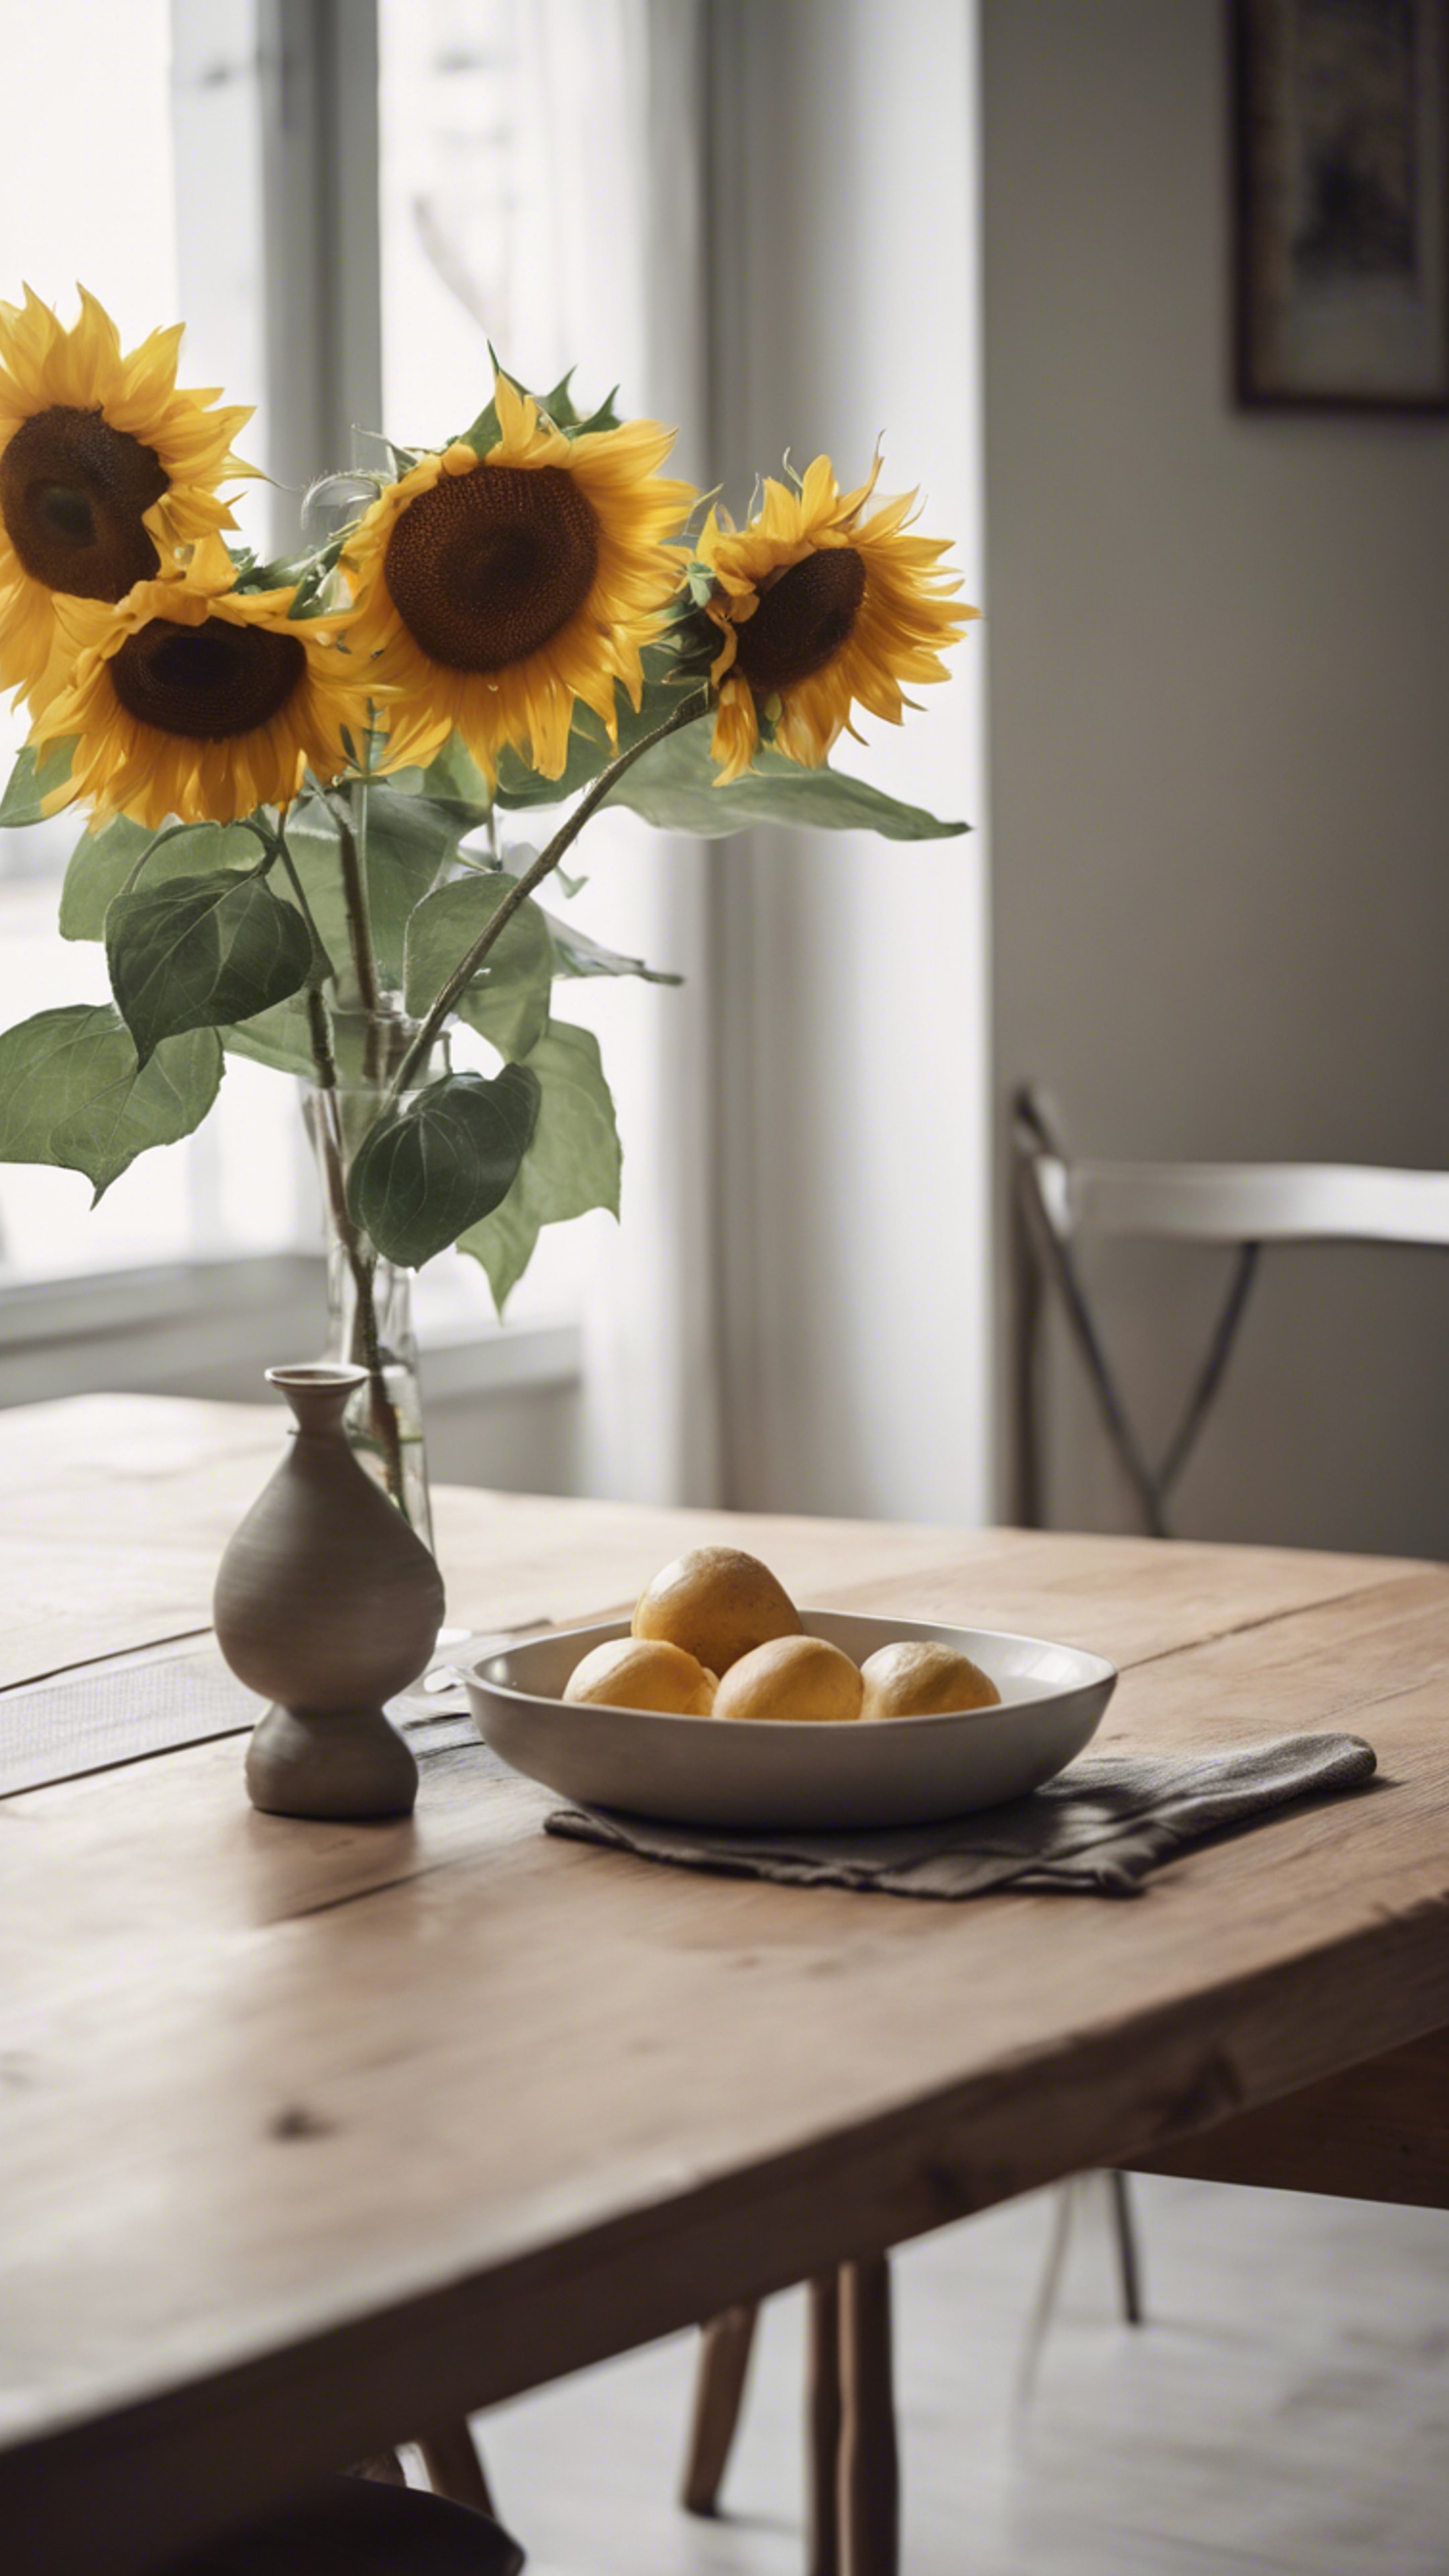 A minimalist dining area with a wooden table, set with simple china and a vase of sunflowers. ورق الجدران[7db5290c1b5a4d25ba08]